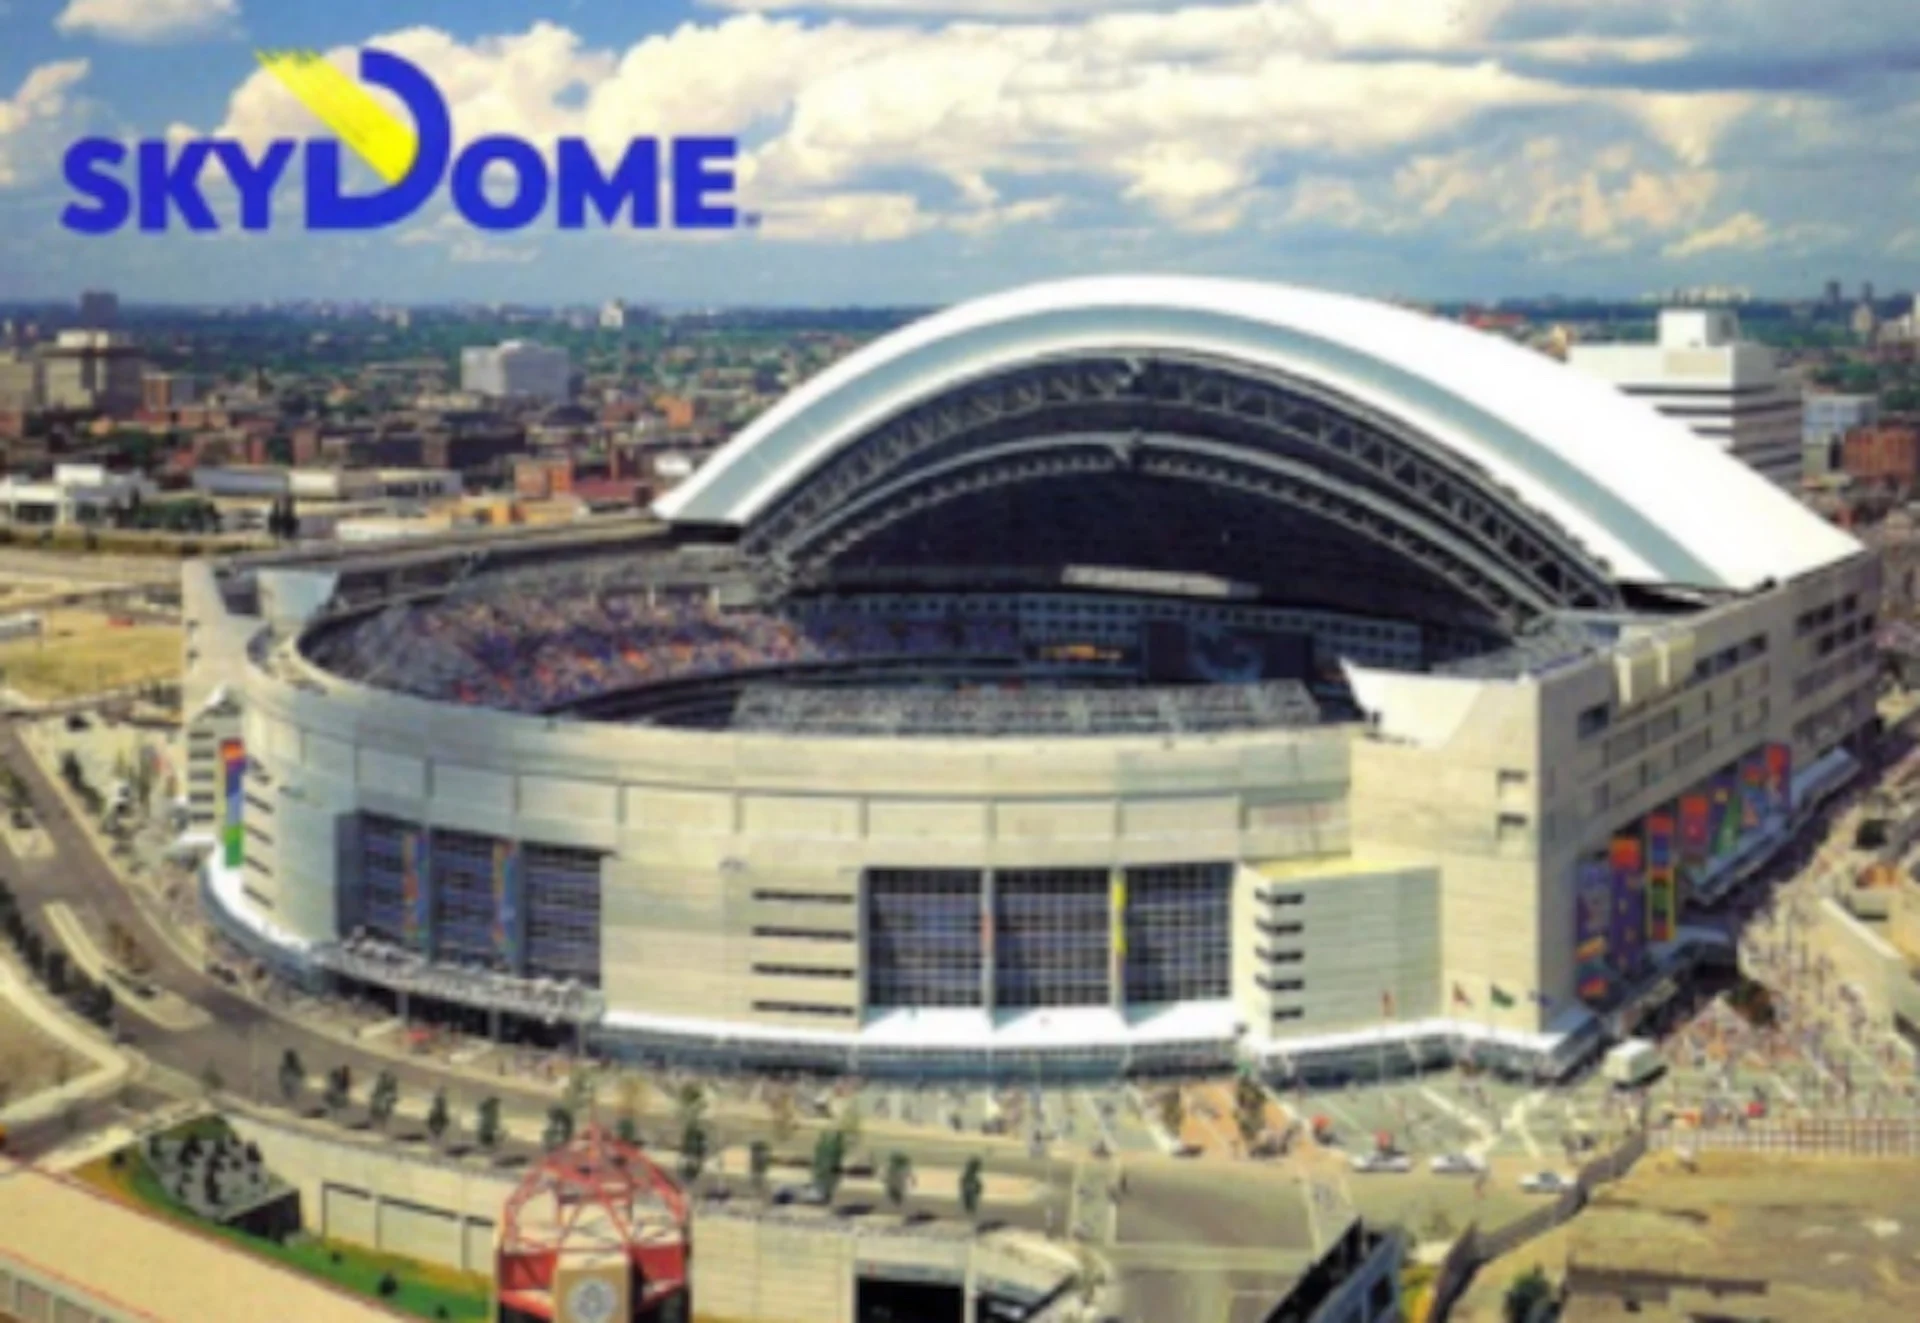 Weather History: 45,000 spectators soaked during SkyDome's opening ceremonies